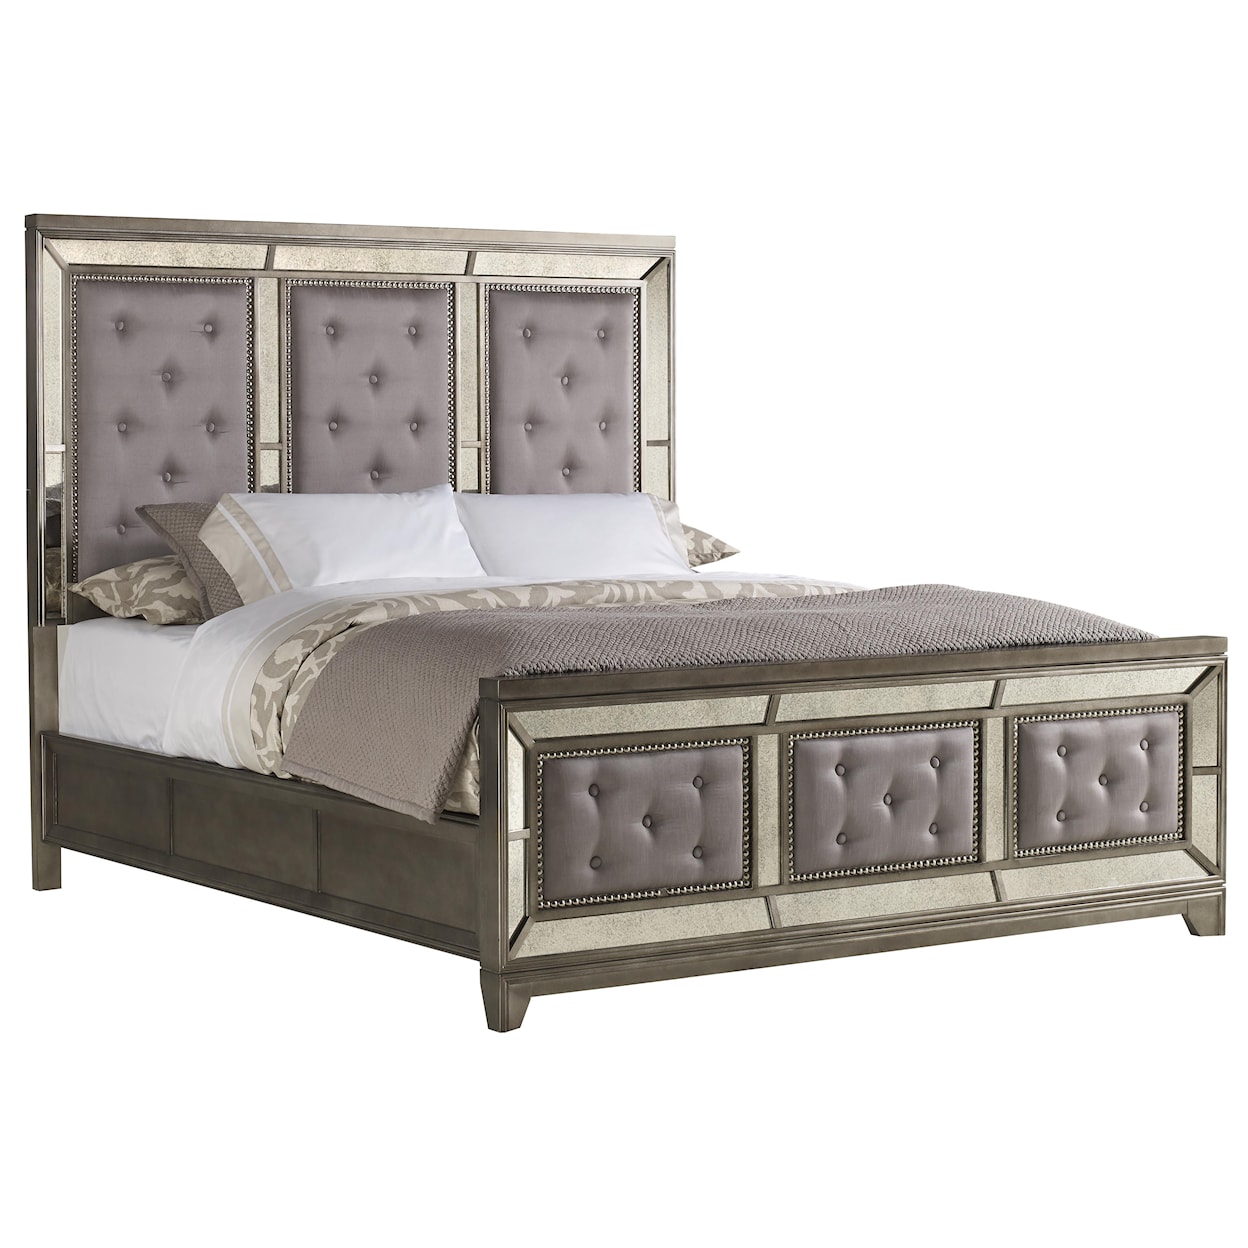 Avalon Furniture Lenox Queen Upholstered Bed